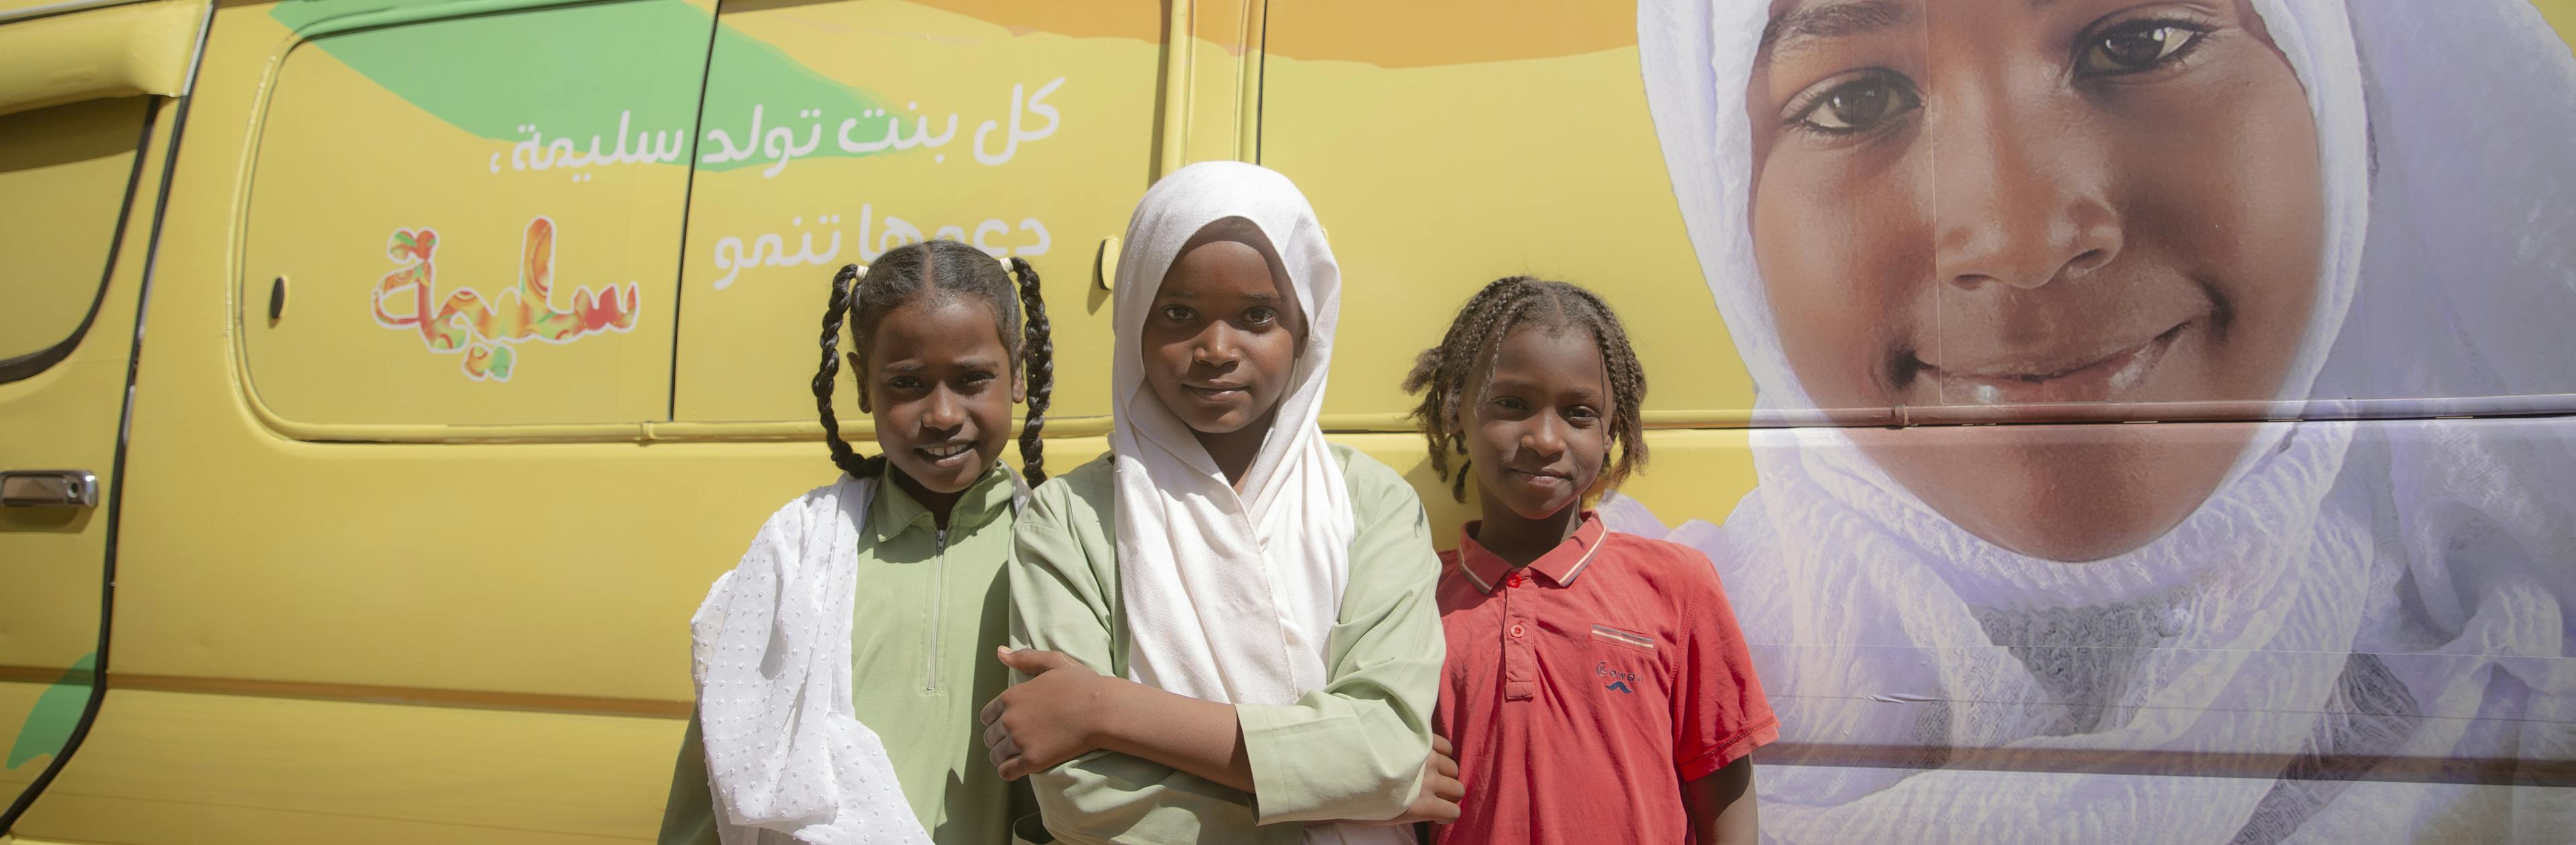 Pupils from Al-fayha Basic School for girls, Khartoum state pose infront of the Saleema caravan during the commemoration event of the International Day of Zero Tolerance for Female Genital Mutilation.